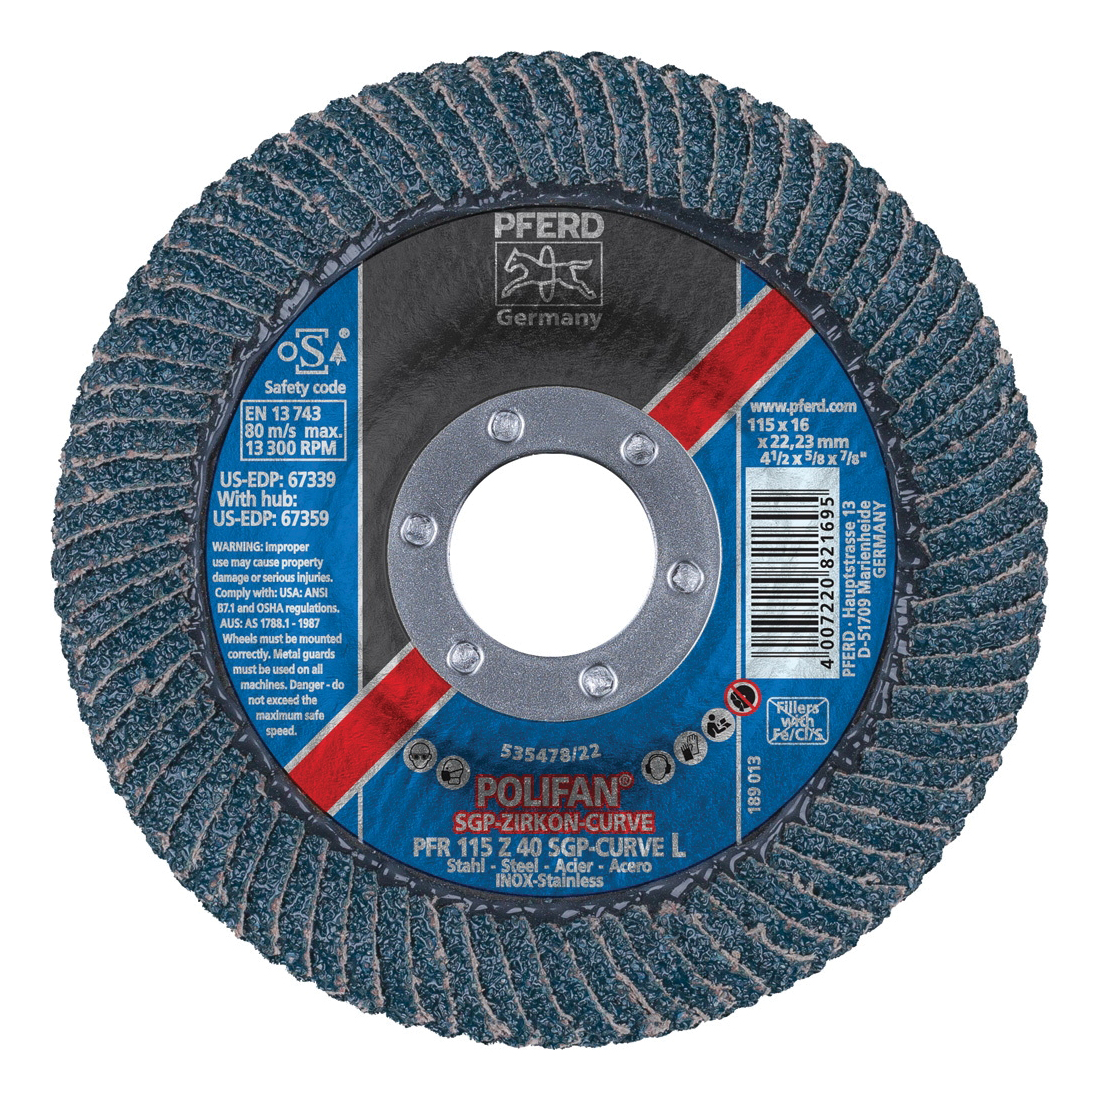 PFERD Polifan® 67339 Special Line SGP Z-CURVE Unthreaded Coated Abrasive Flap Disc, 4-1/2 in Dia, 7/8 in Center Hole, 40 Grit, Zirconia Alumina Abrasive, Type PFR/Radial Disc